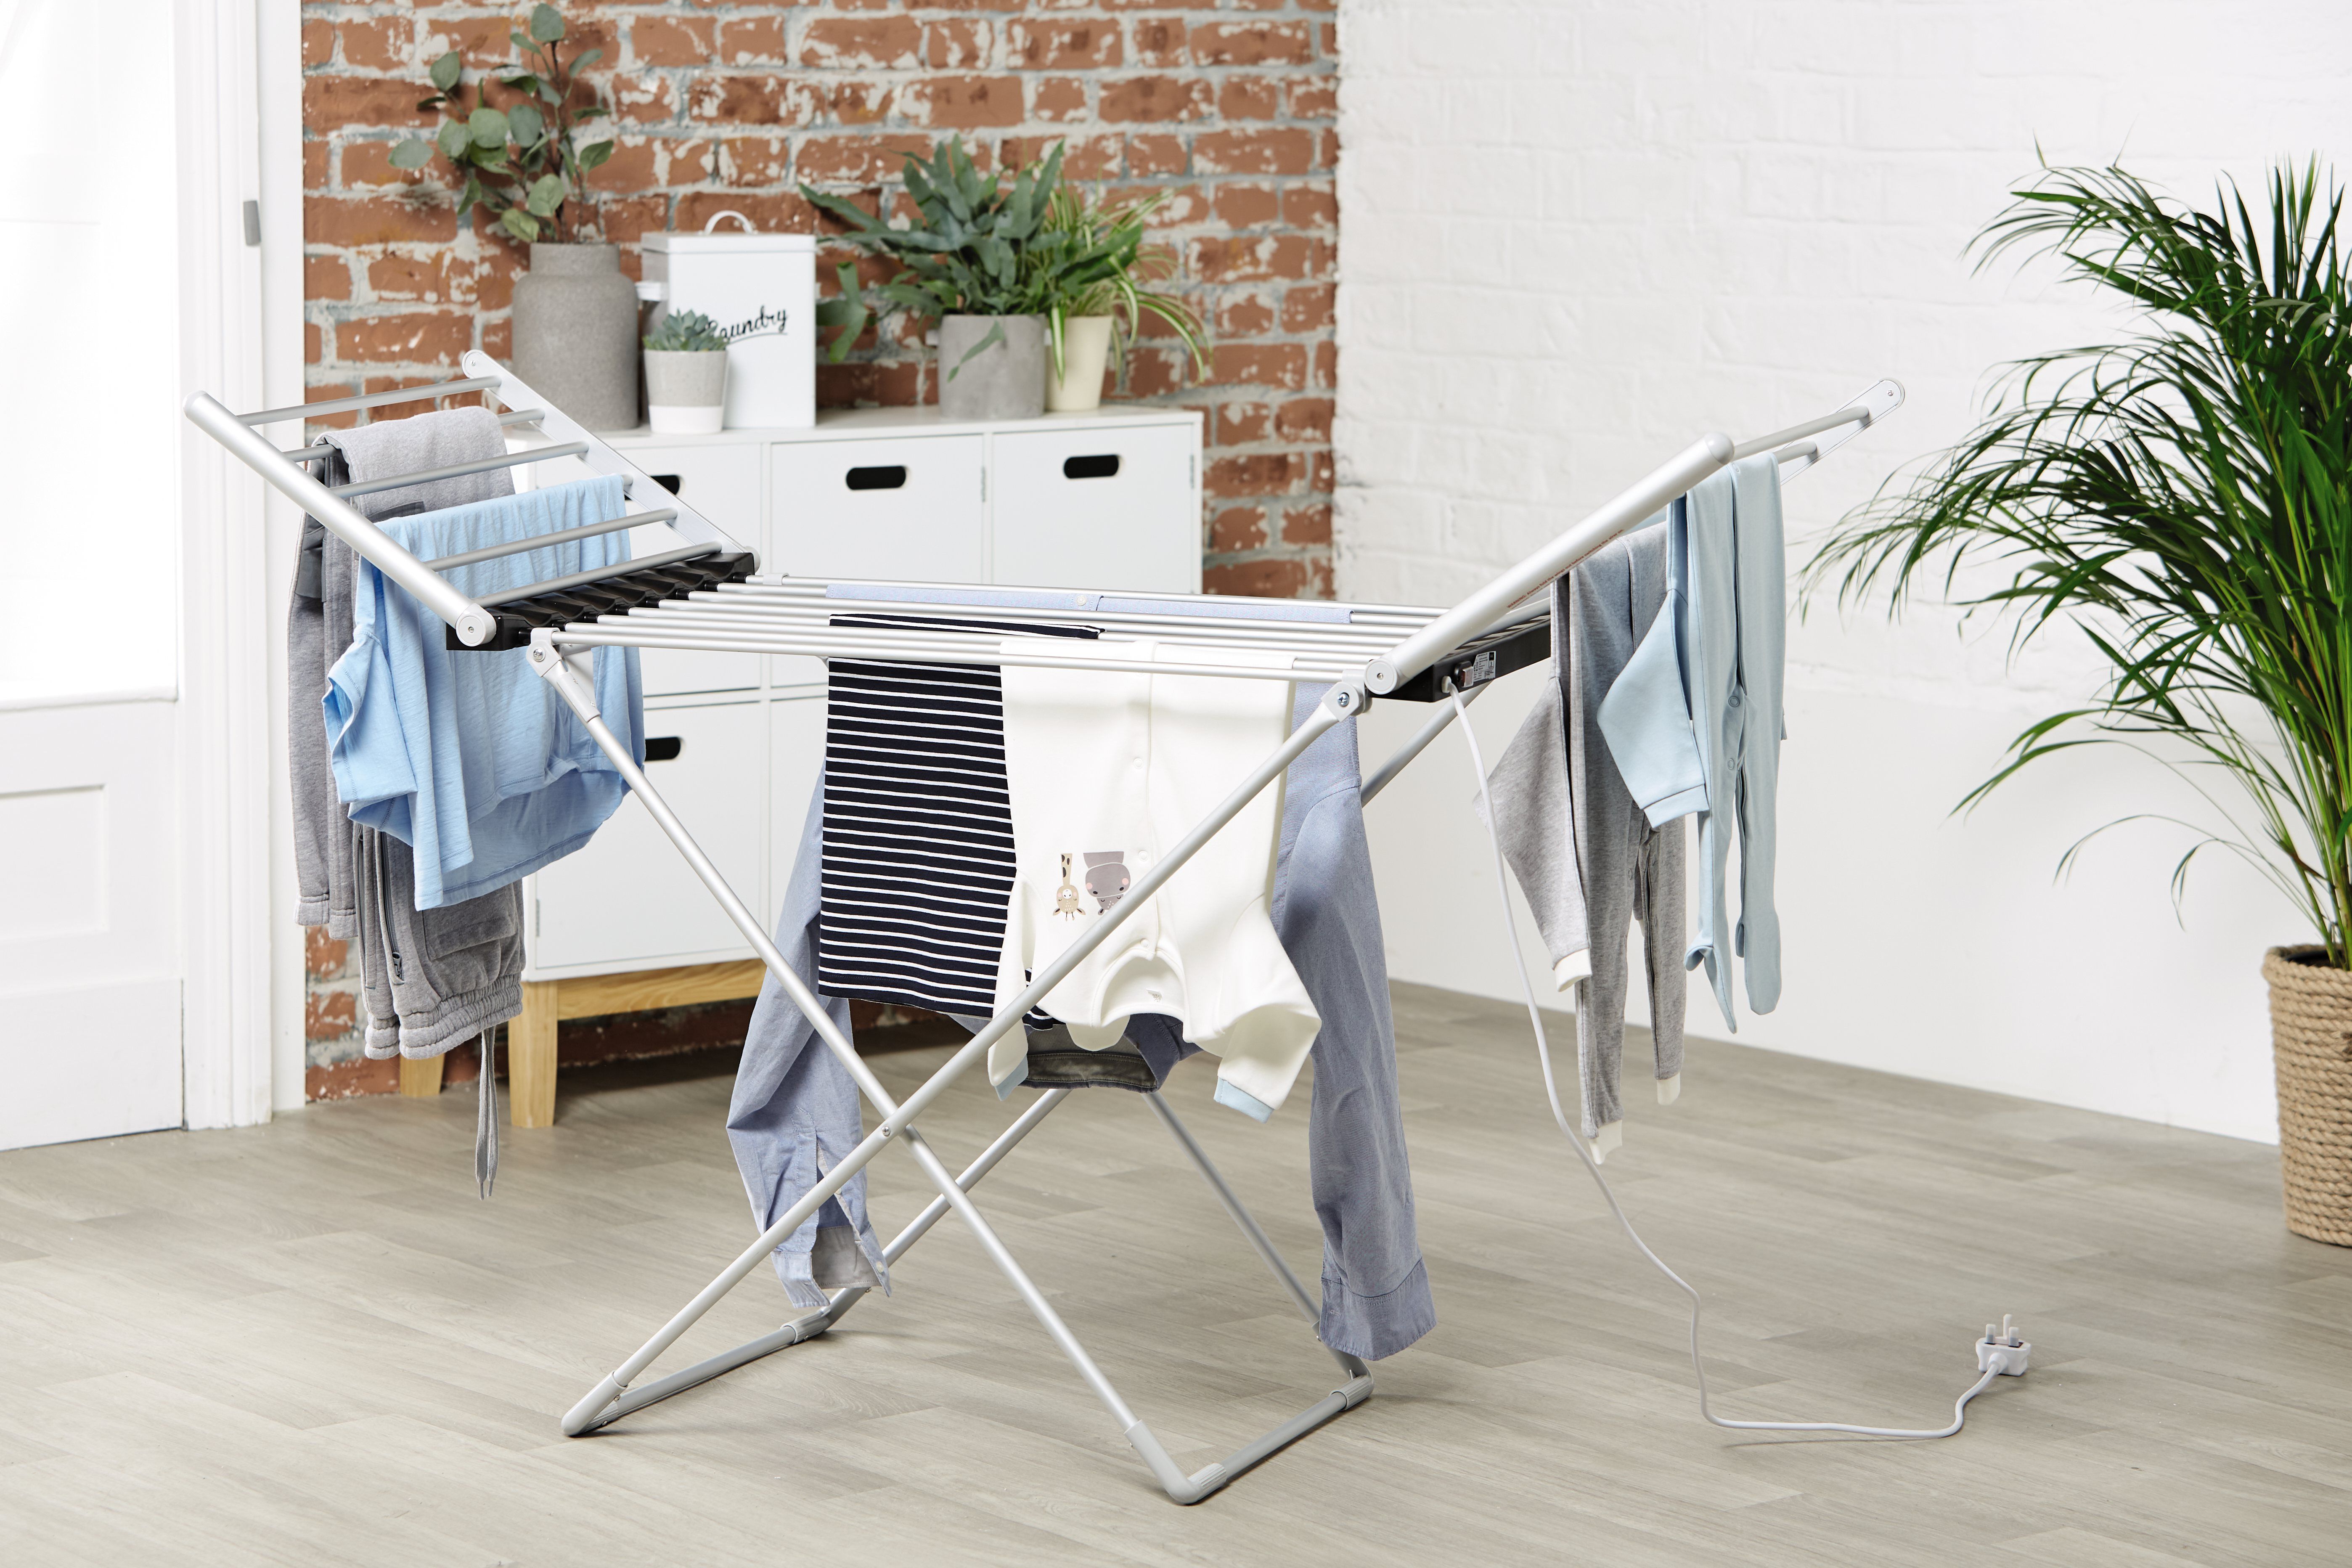 Aldi Launches Affordable Heated Clothes Airer, 53% OFF